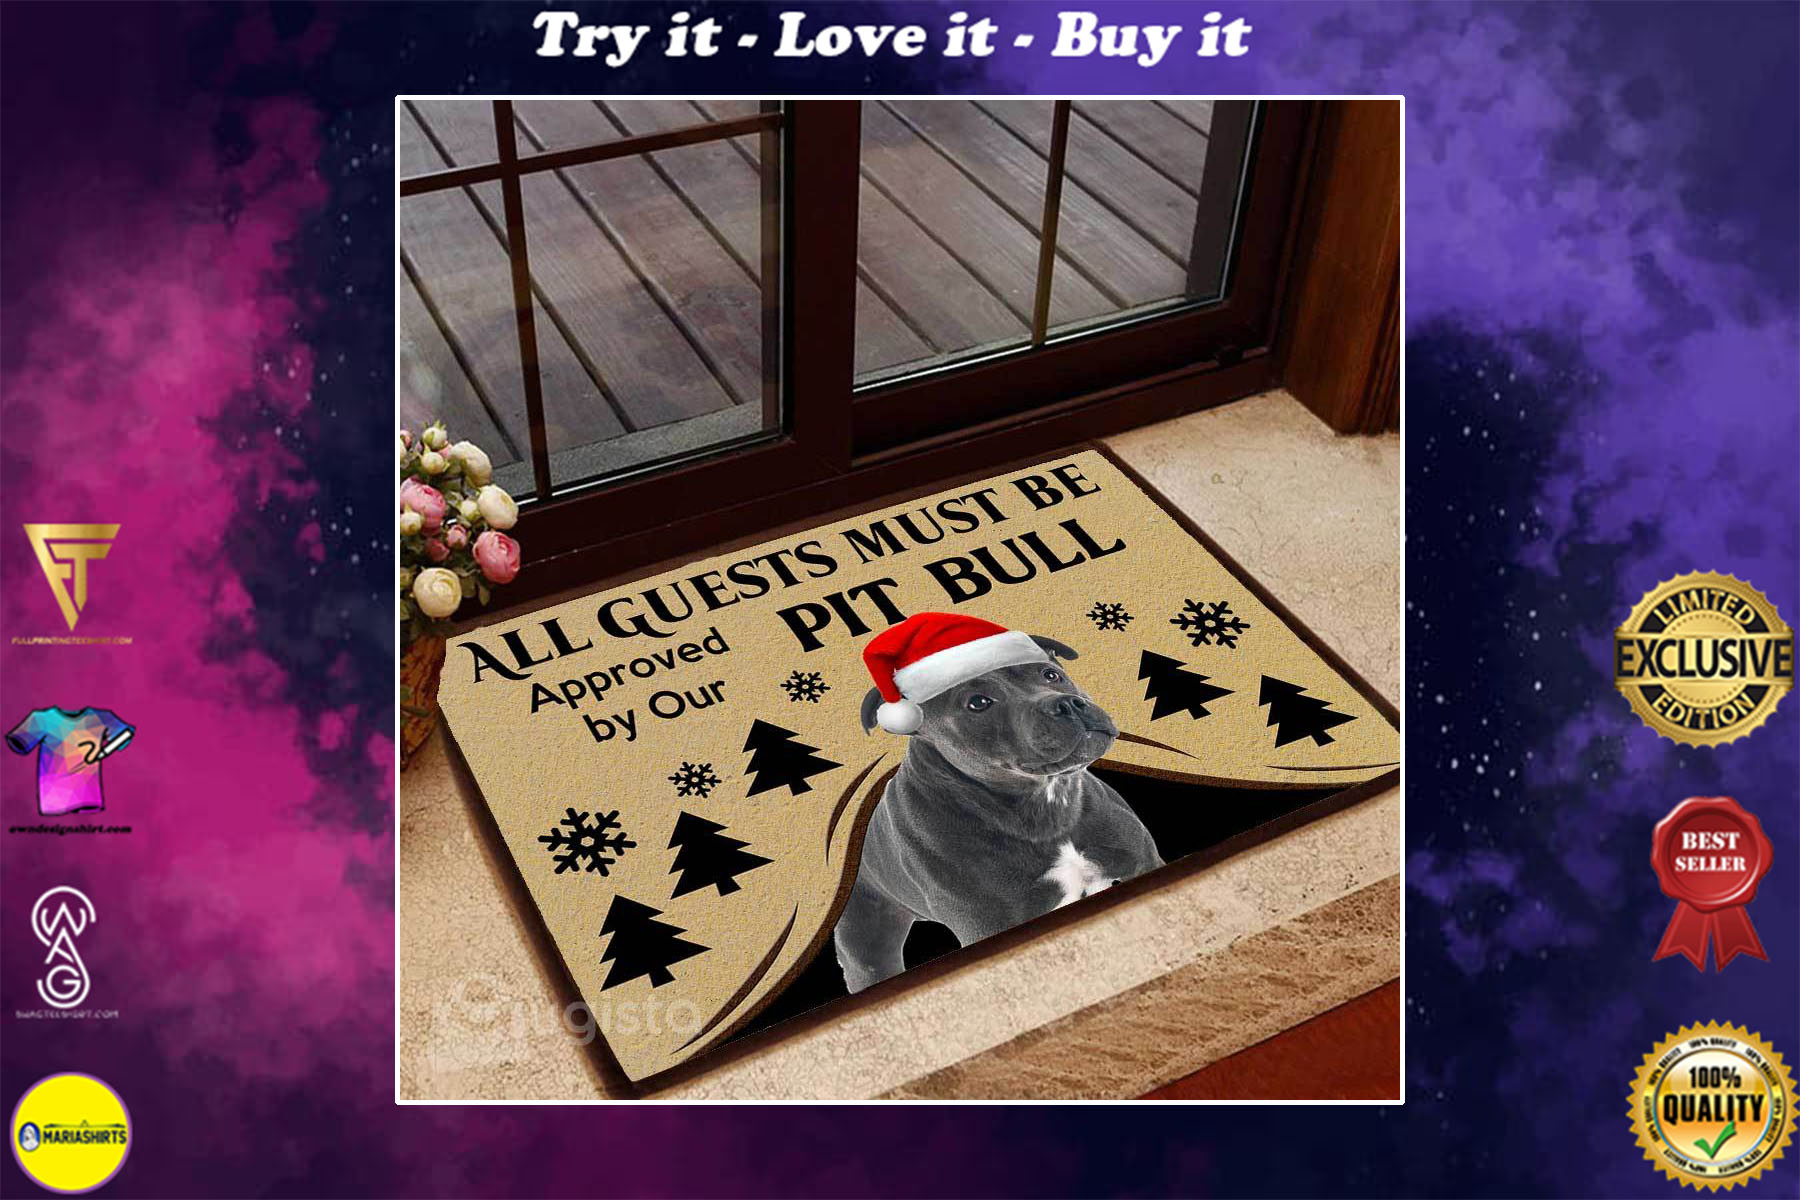 [special edition] all guests must be approved by our pit bull christmas doormat – maria